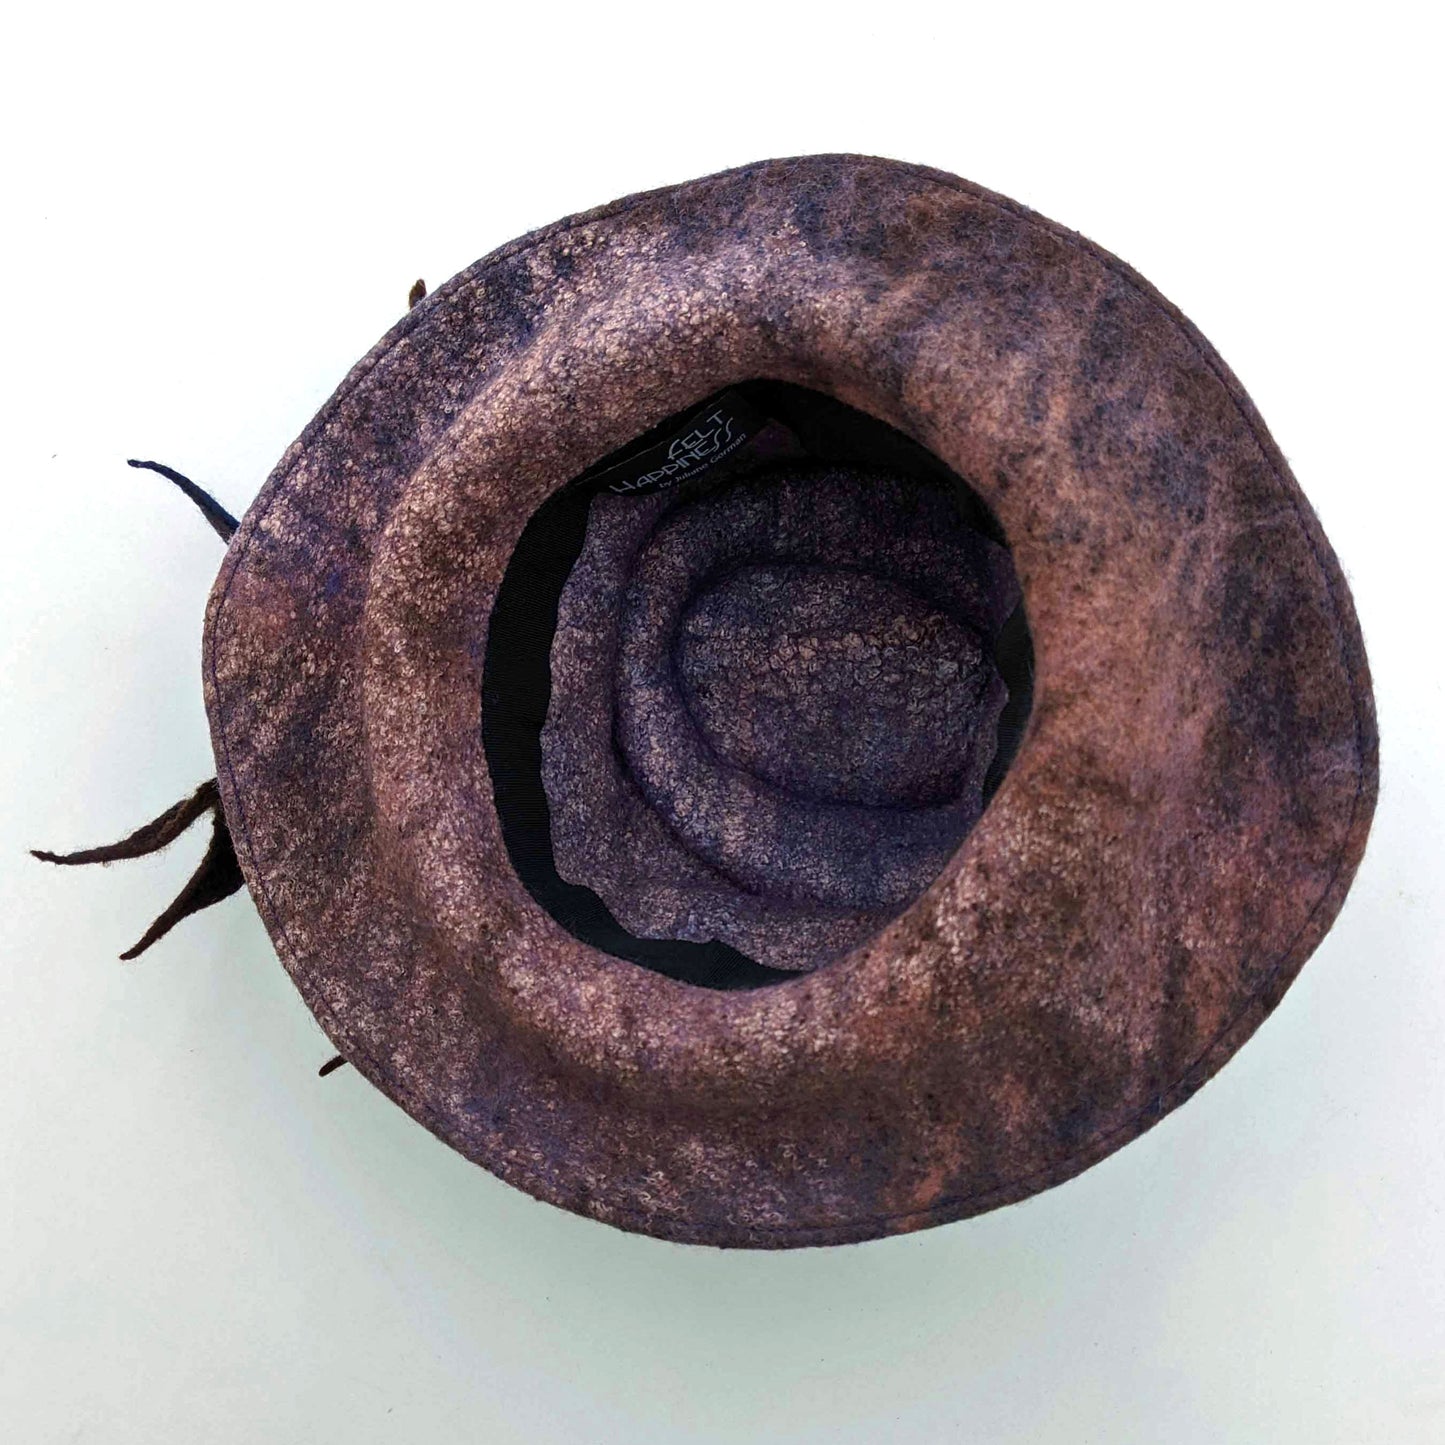 Asymmetrical Brimmed Felt Hat in an Ombre of Navy Brown - insideview